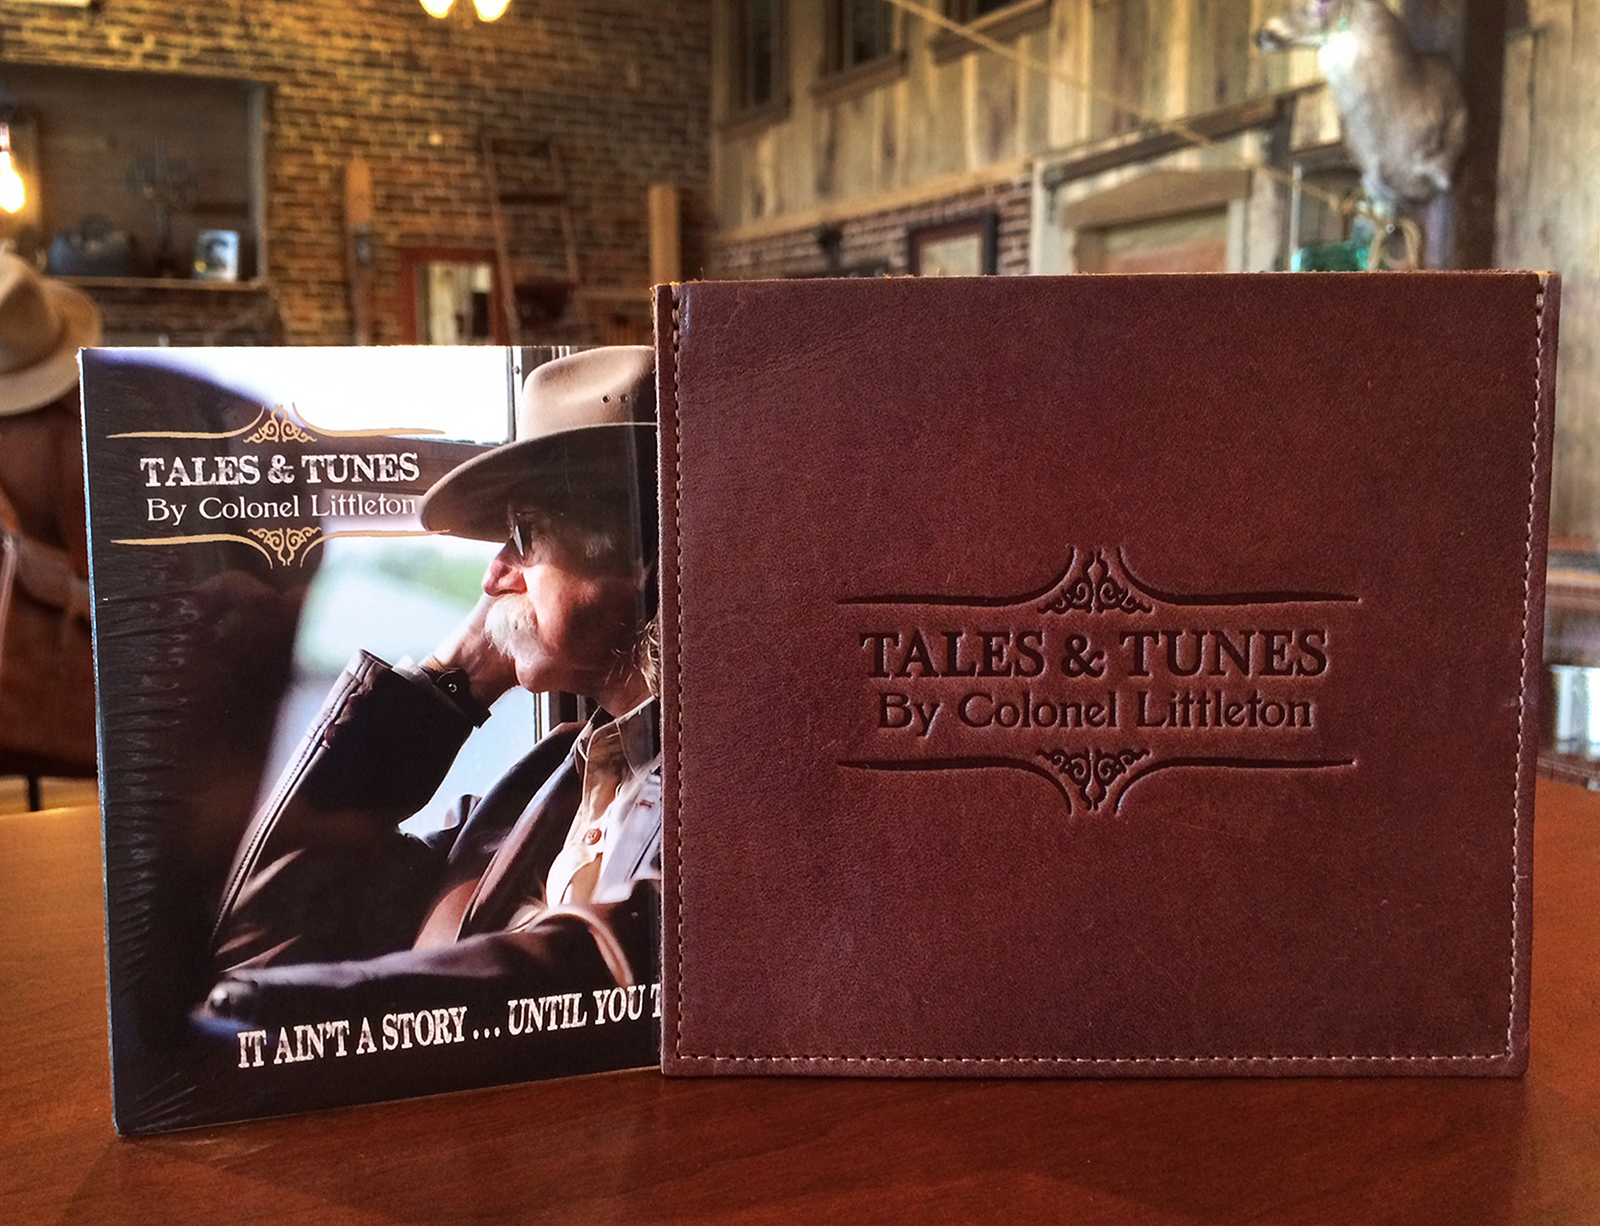 Colonel's Tales and Tunes CD with the leather CD cover.